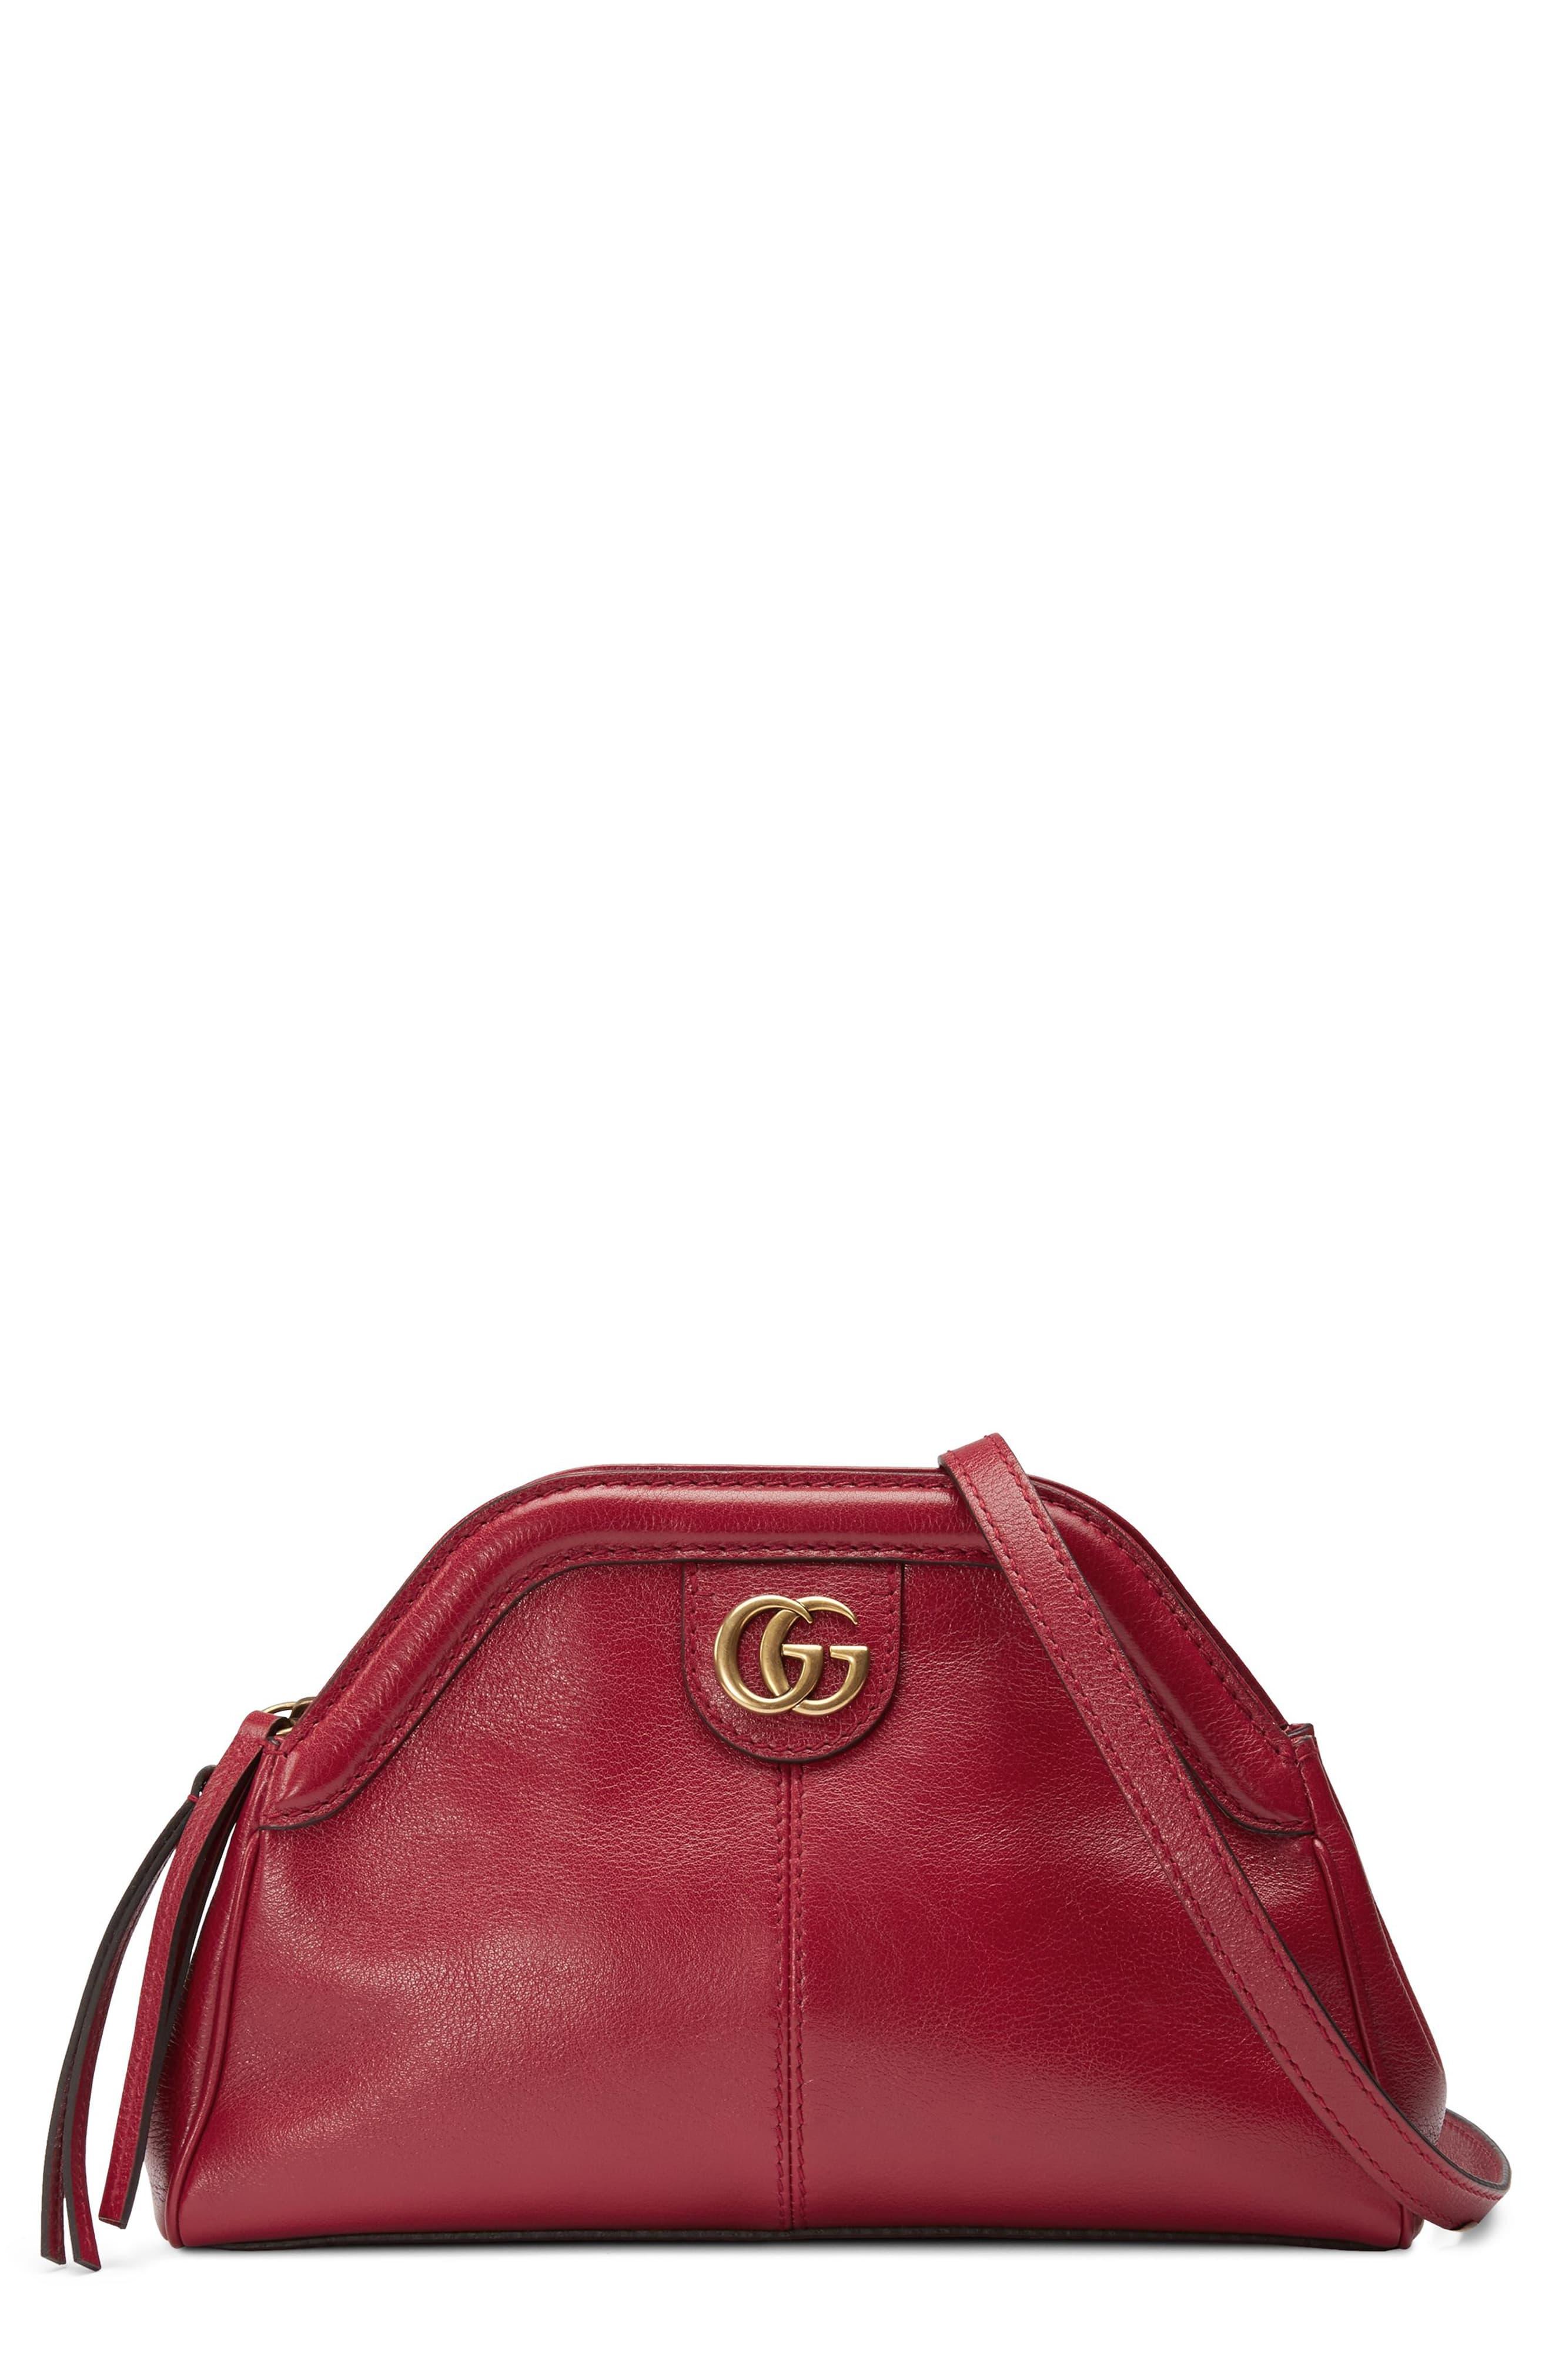 Gucci Small Re(belle) Leather Crossbody Bag in Red - Lyst